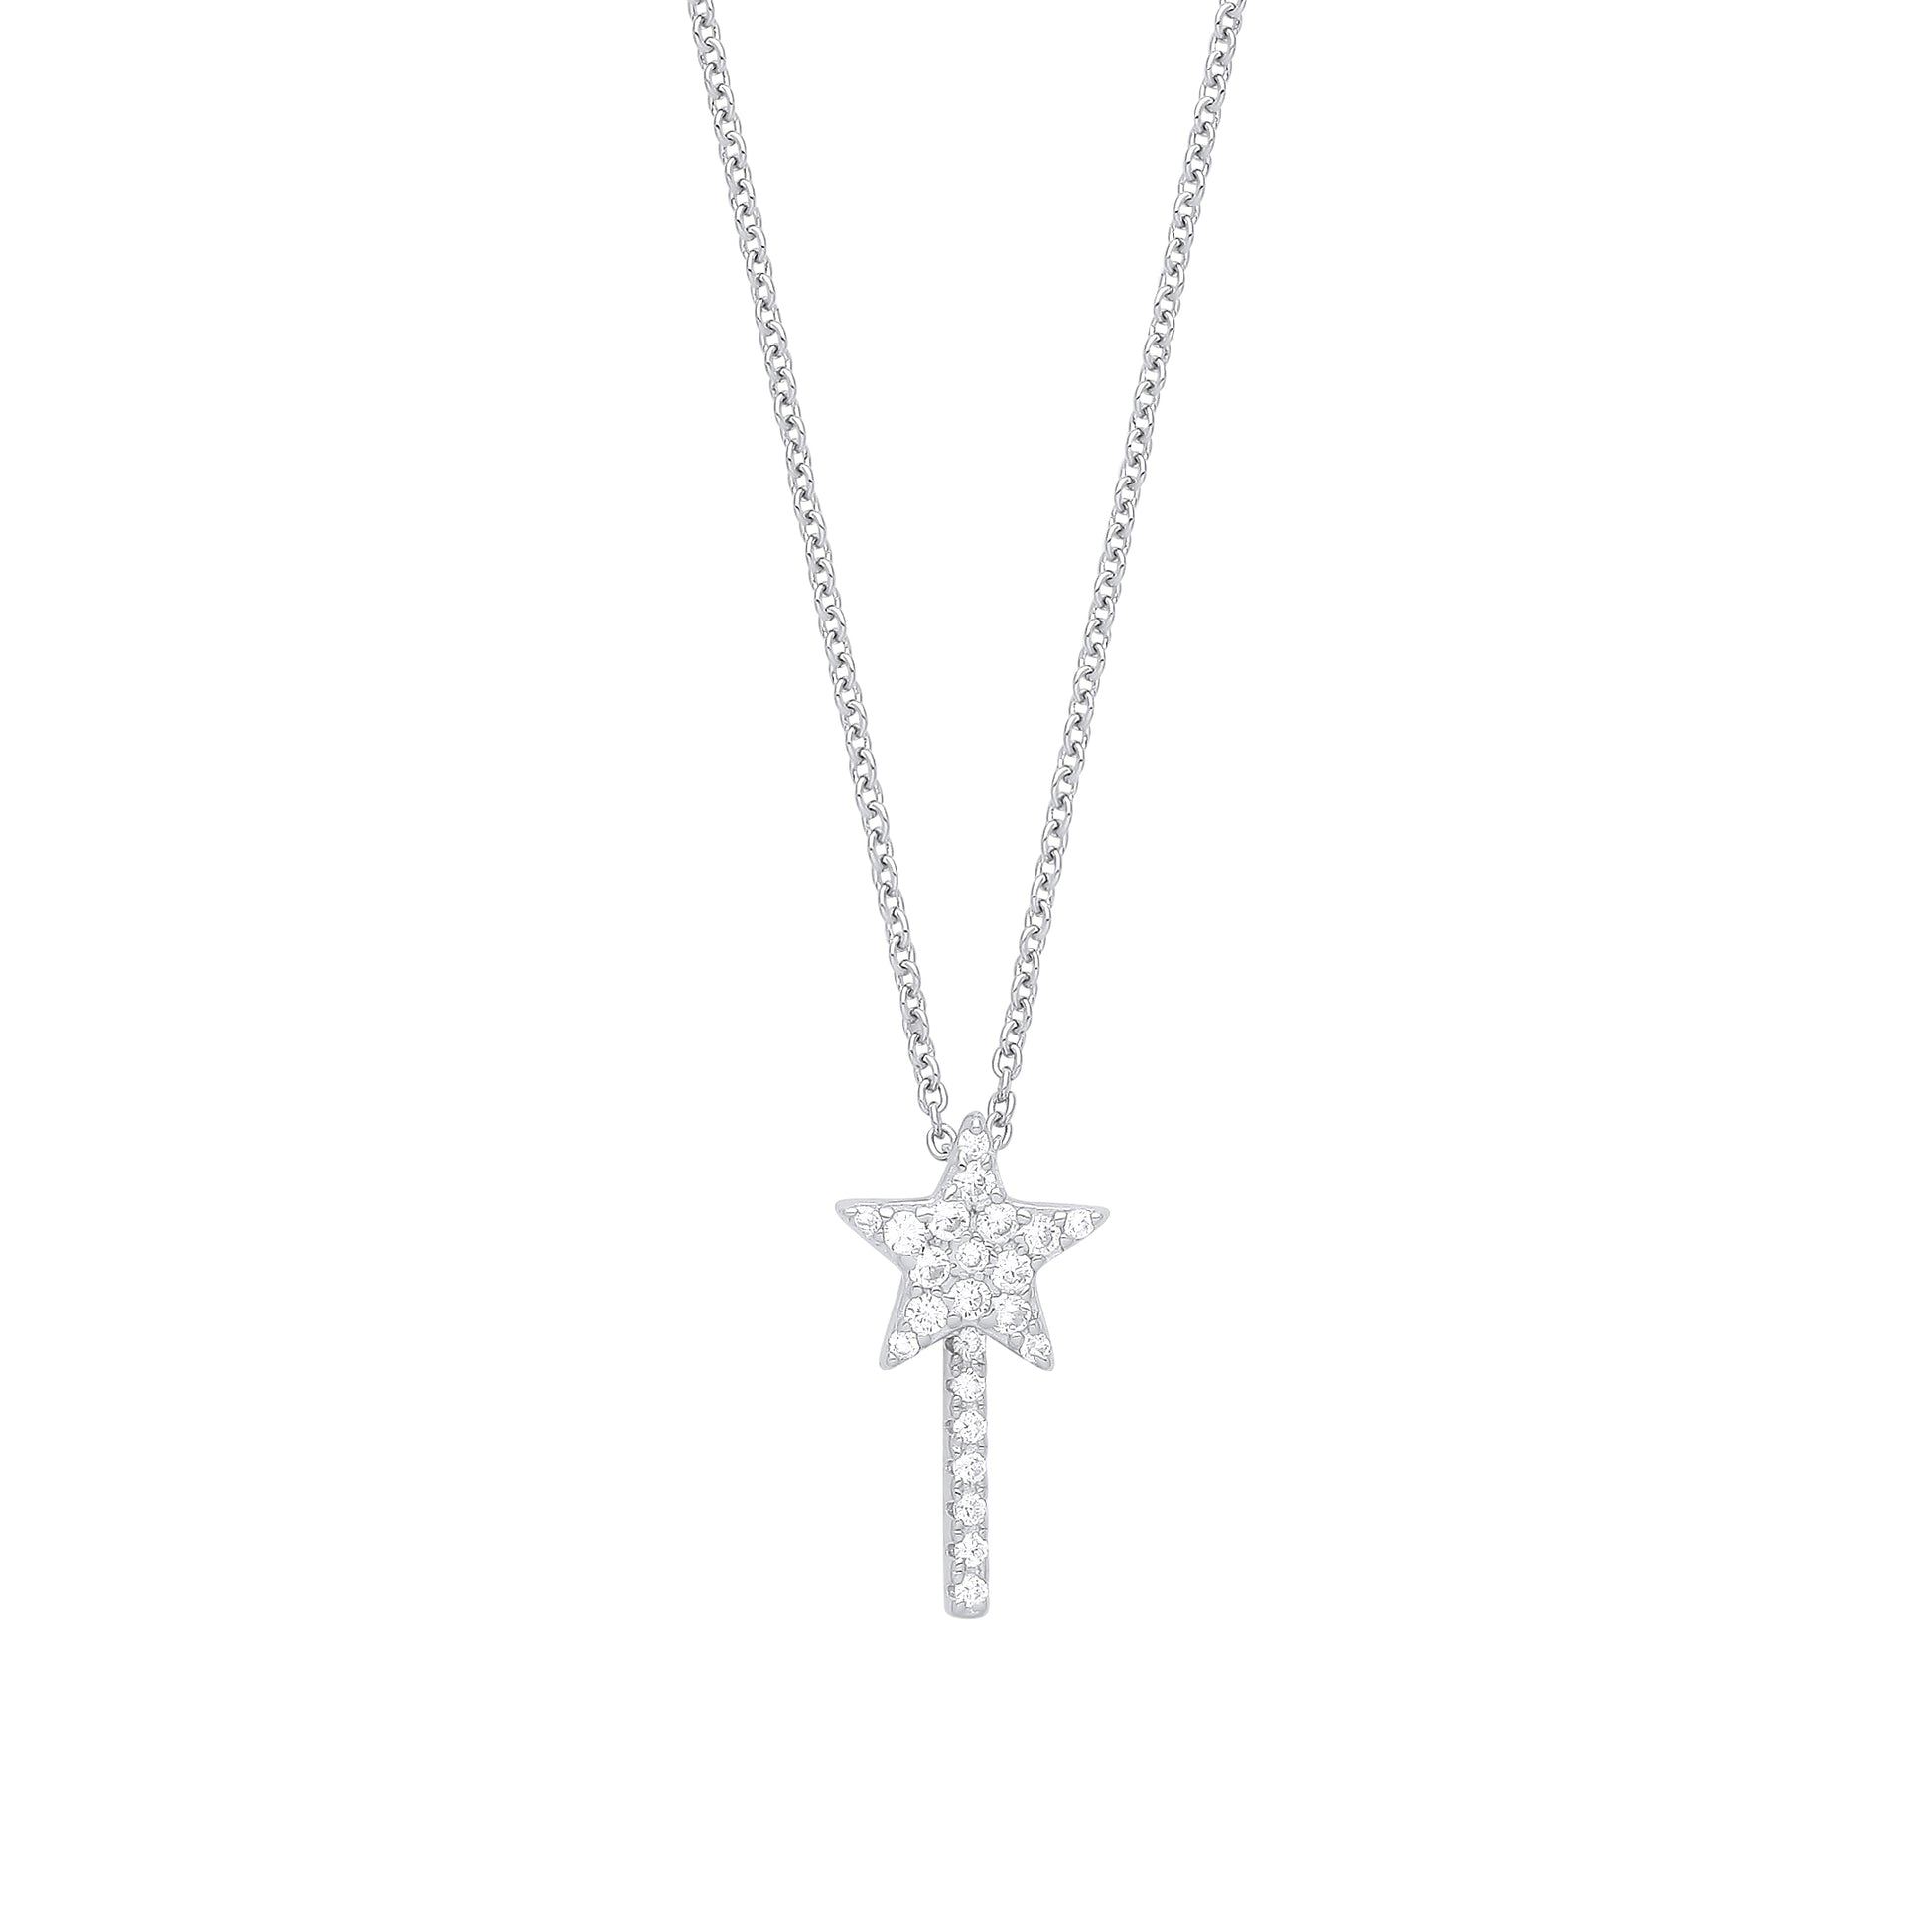 Silver  Petite Pave Shooting Star Fairy Wand Lavalier Necklace - GVK345